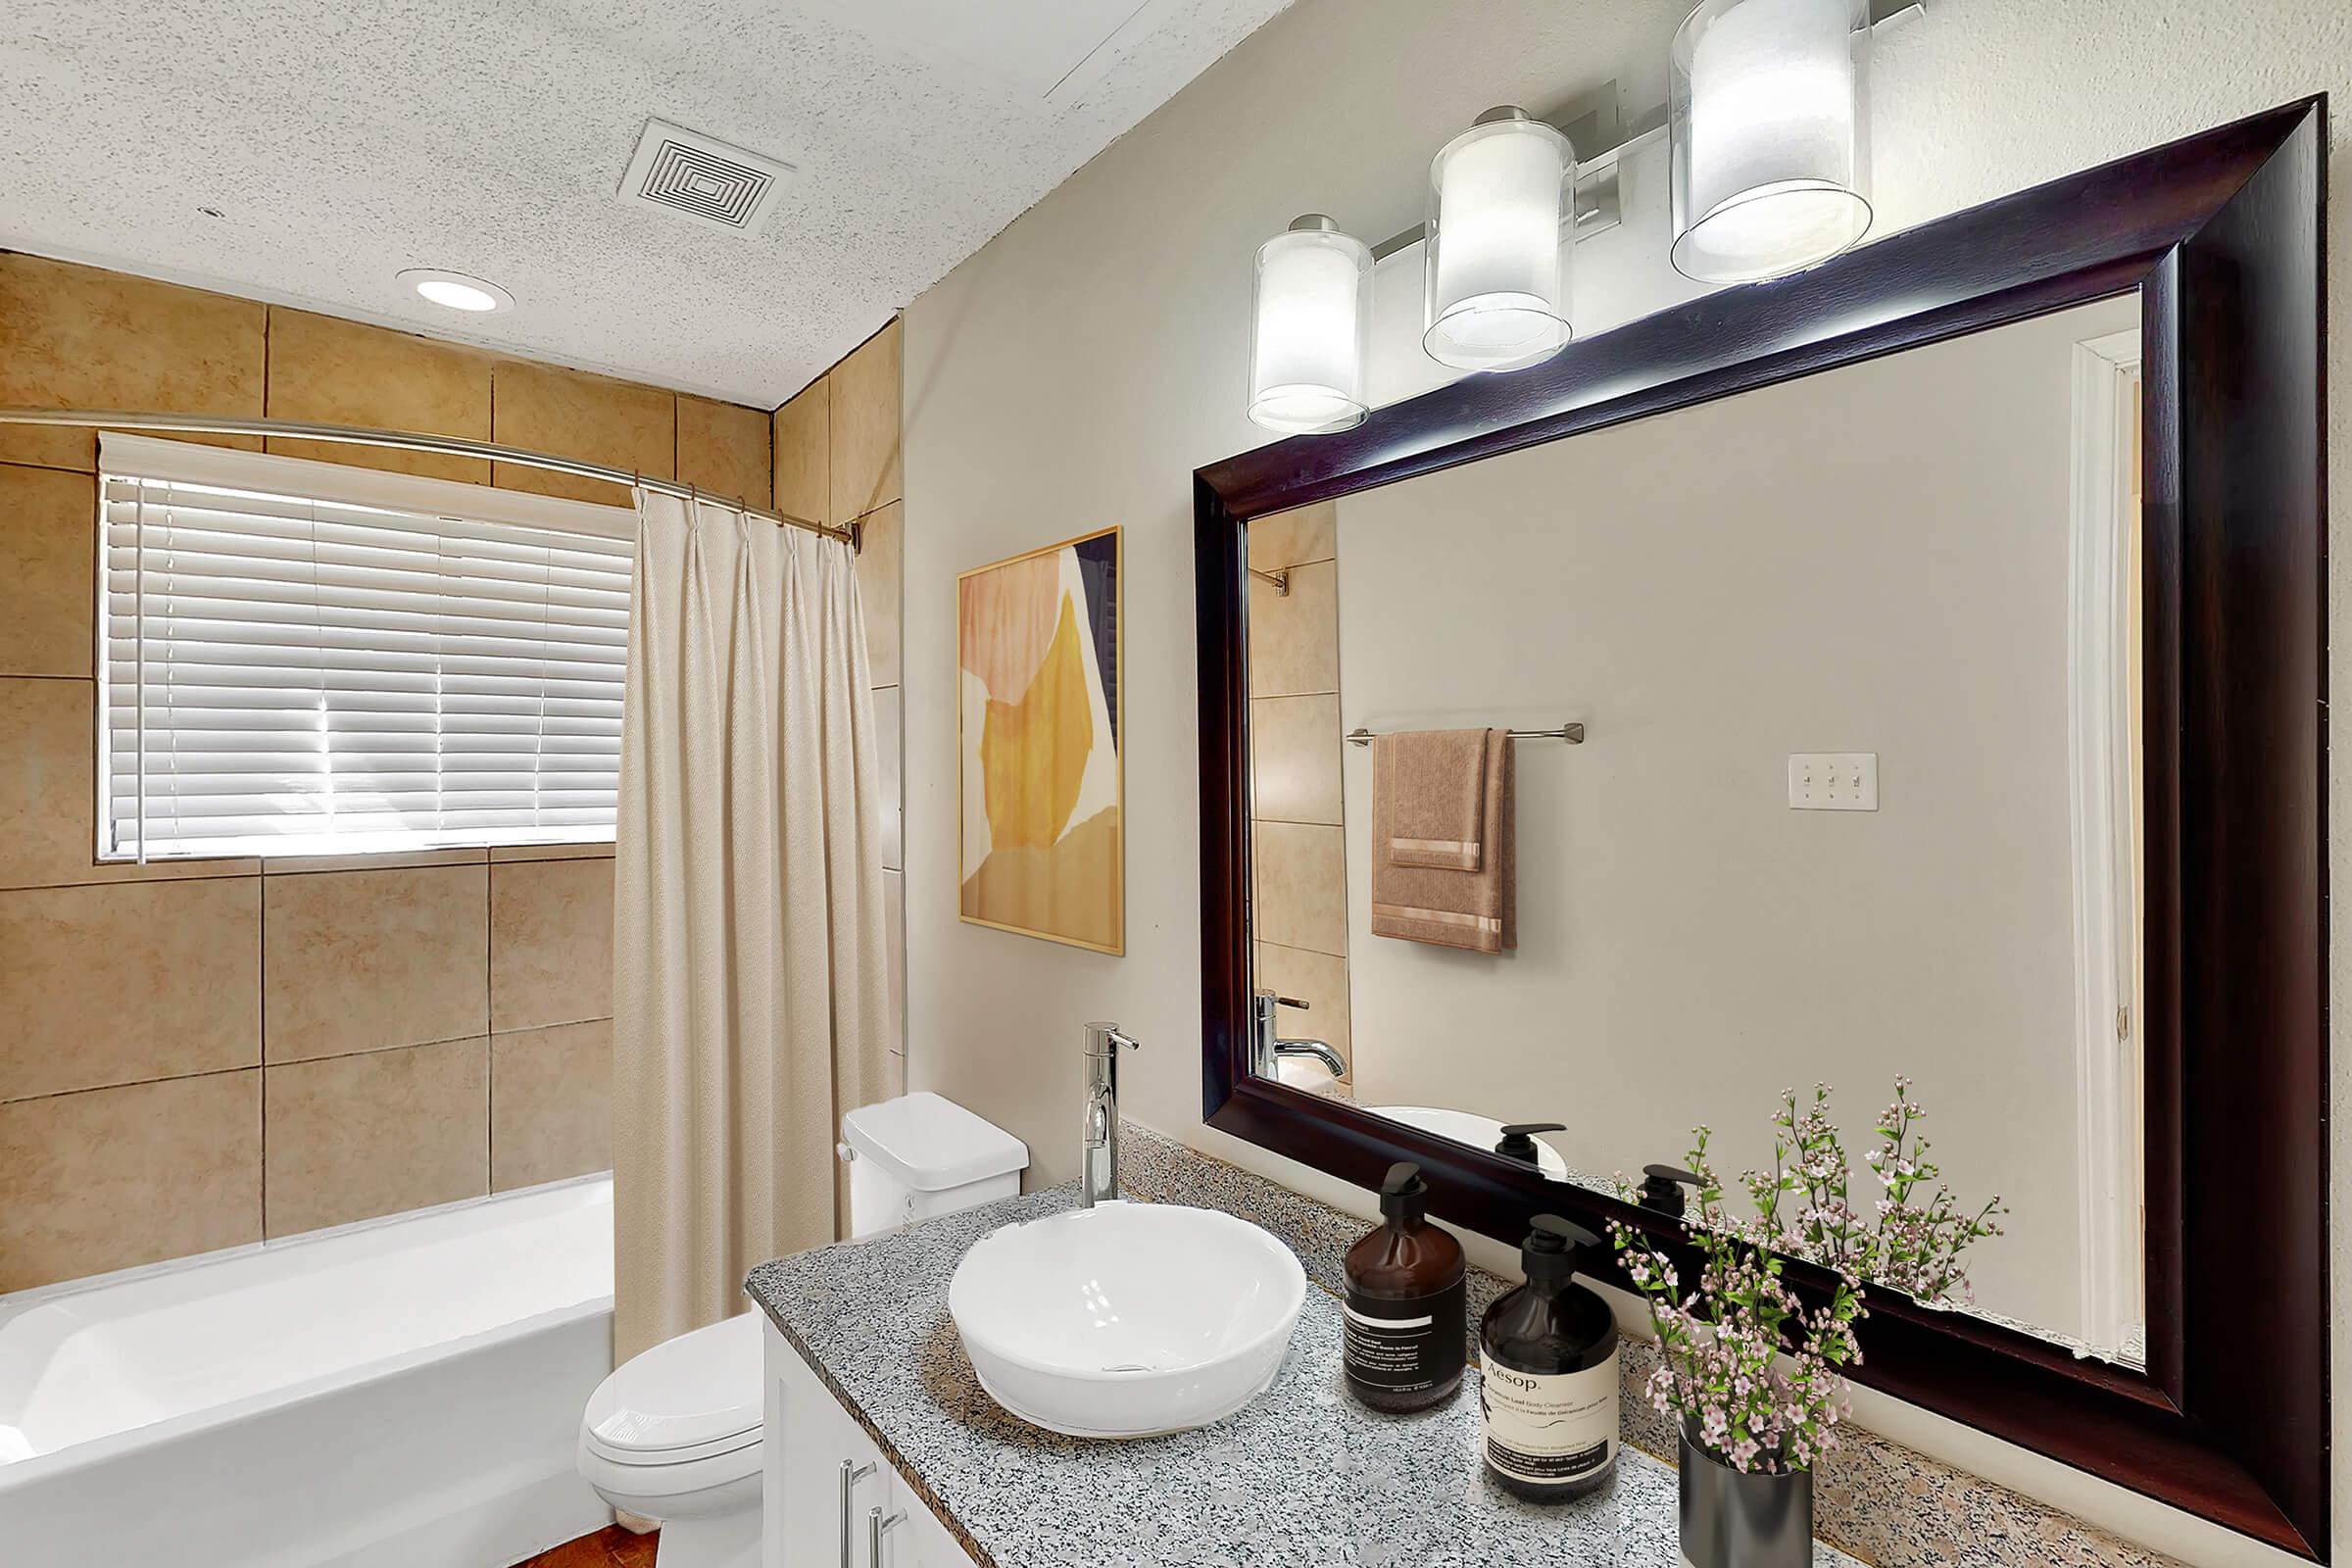 CONTEMPORARY BATHROOM AT PRIME AT LAKE HIGHLANDS APARTMENTS FOR RENT, IN DALLAS, TX